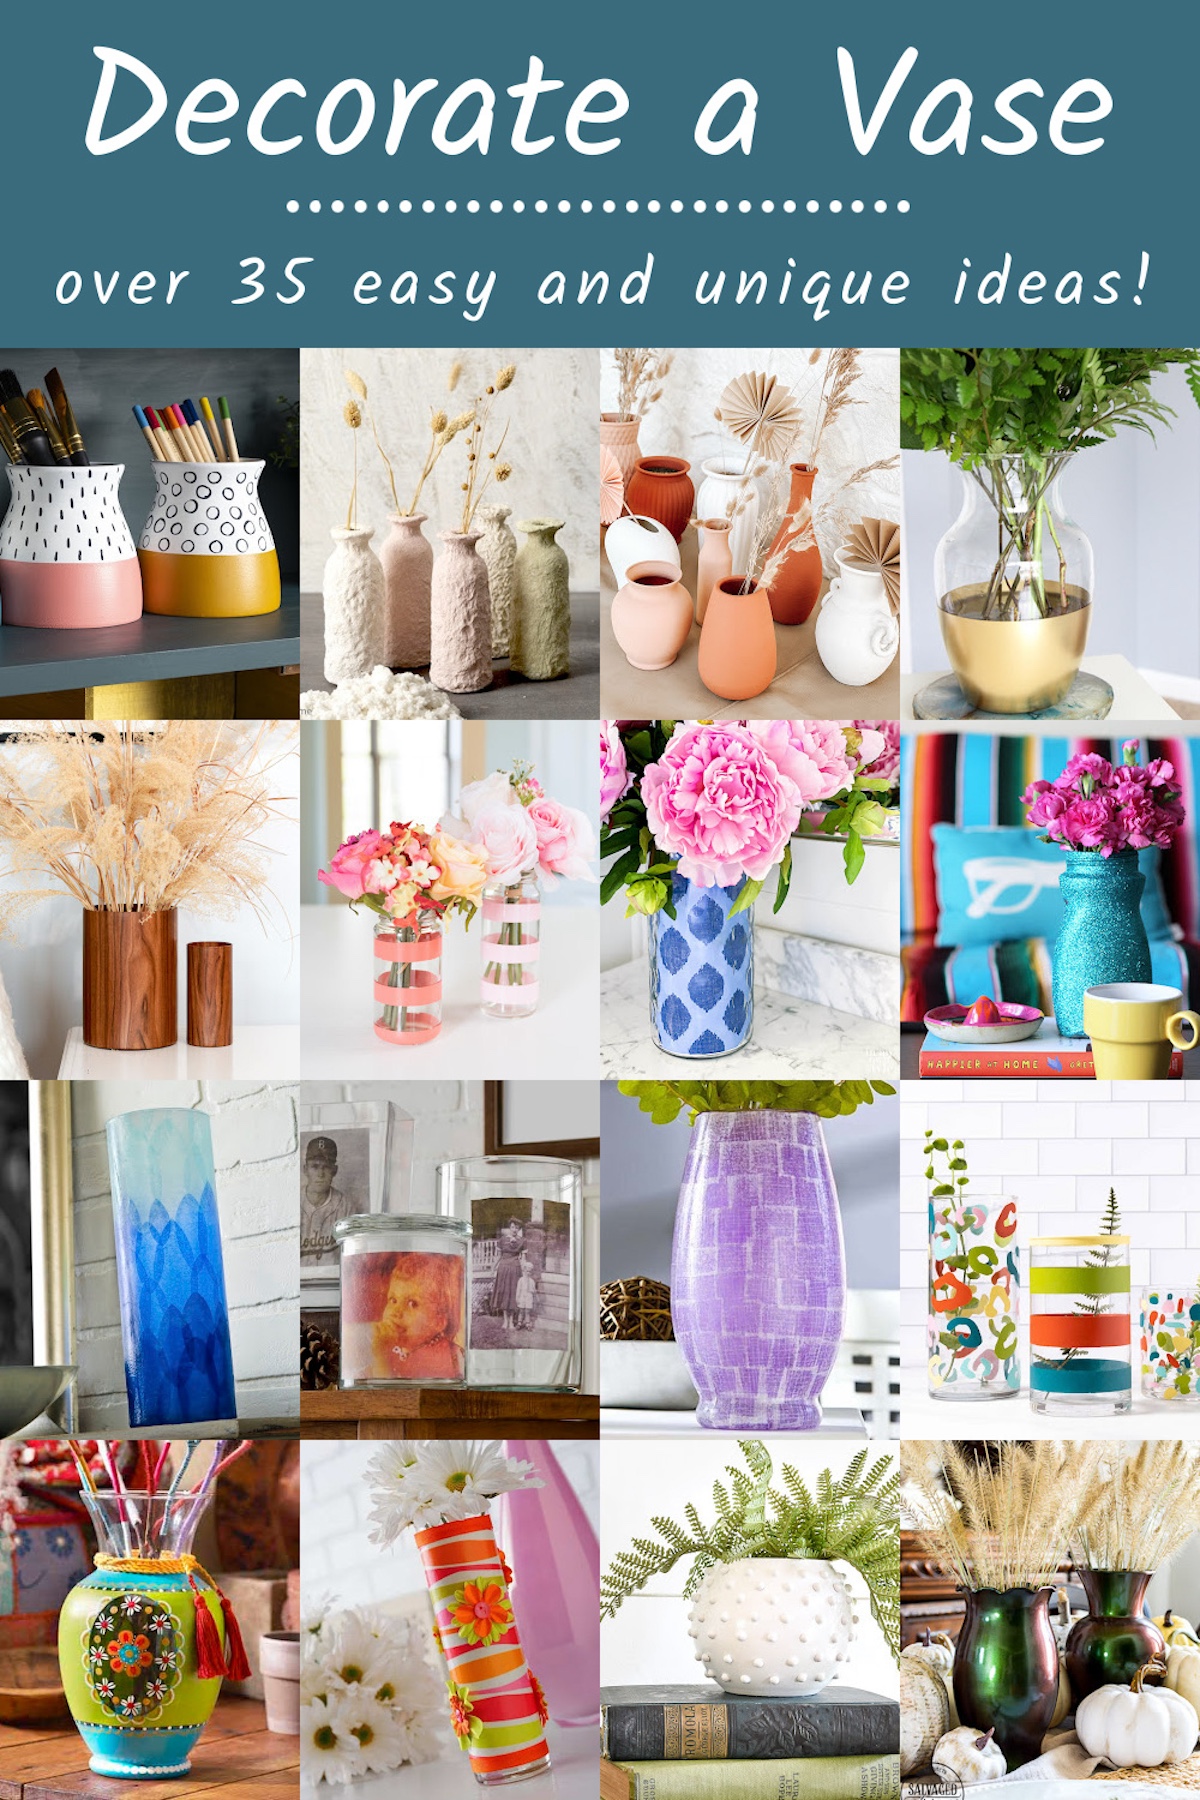 Decorate-a-Vase with one of these ideas